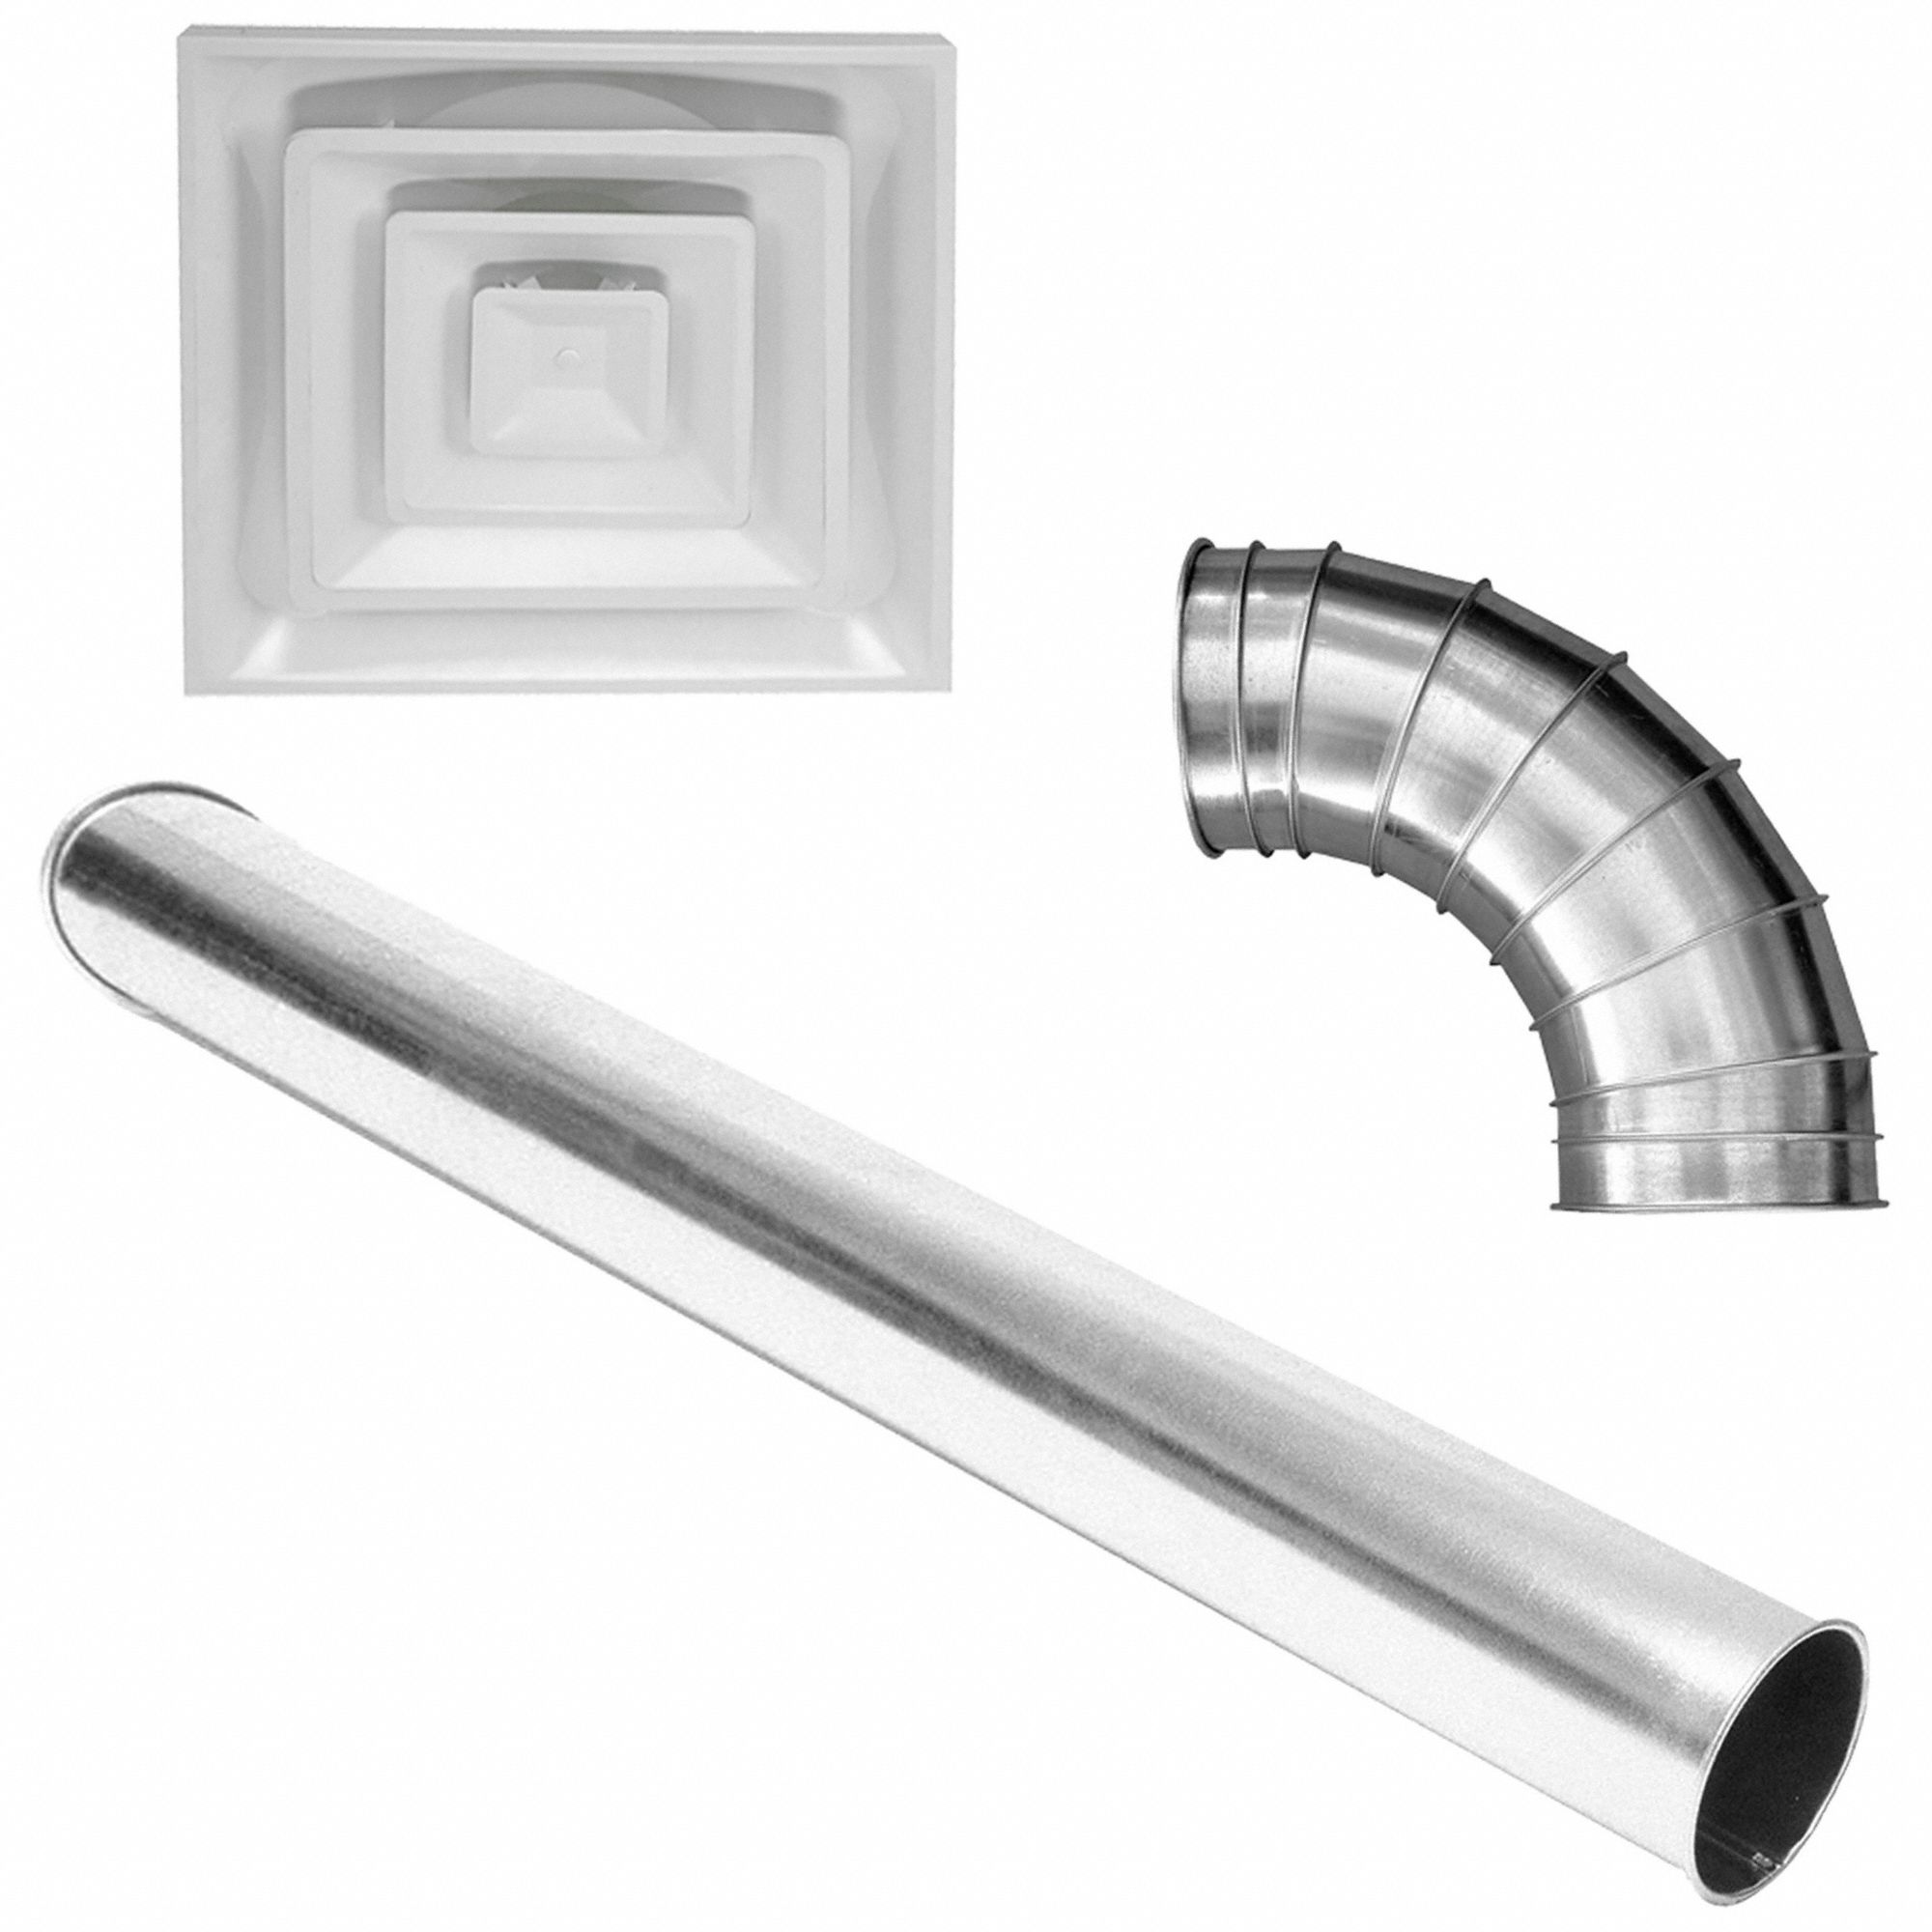 Ductwork, Venting, Fittings and Caps